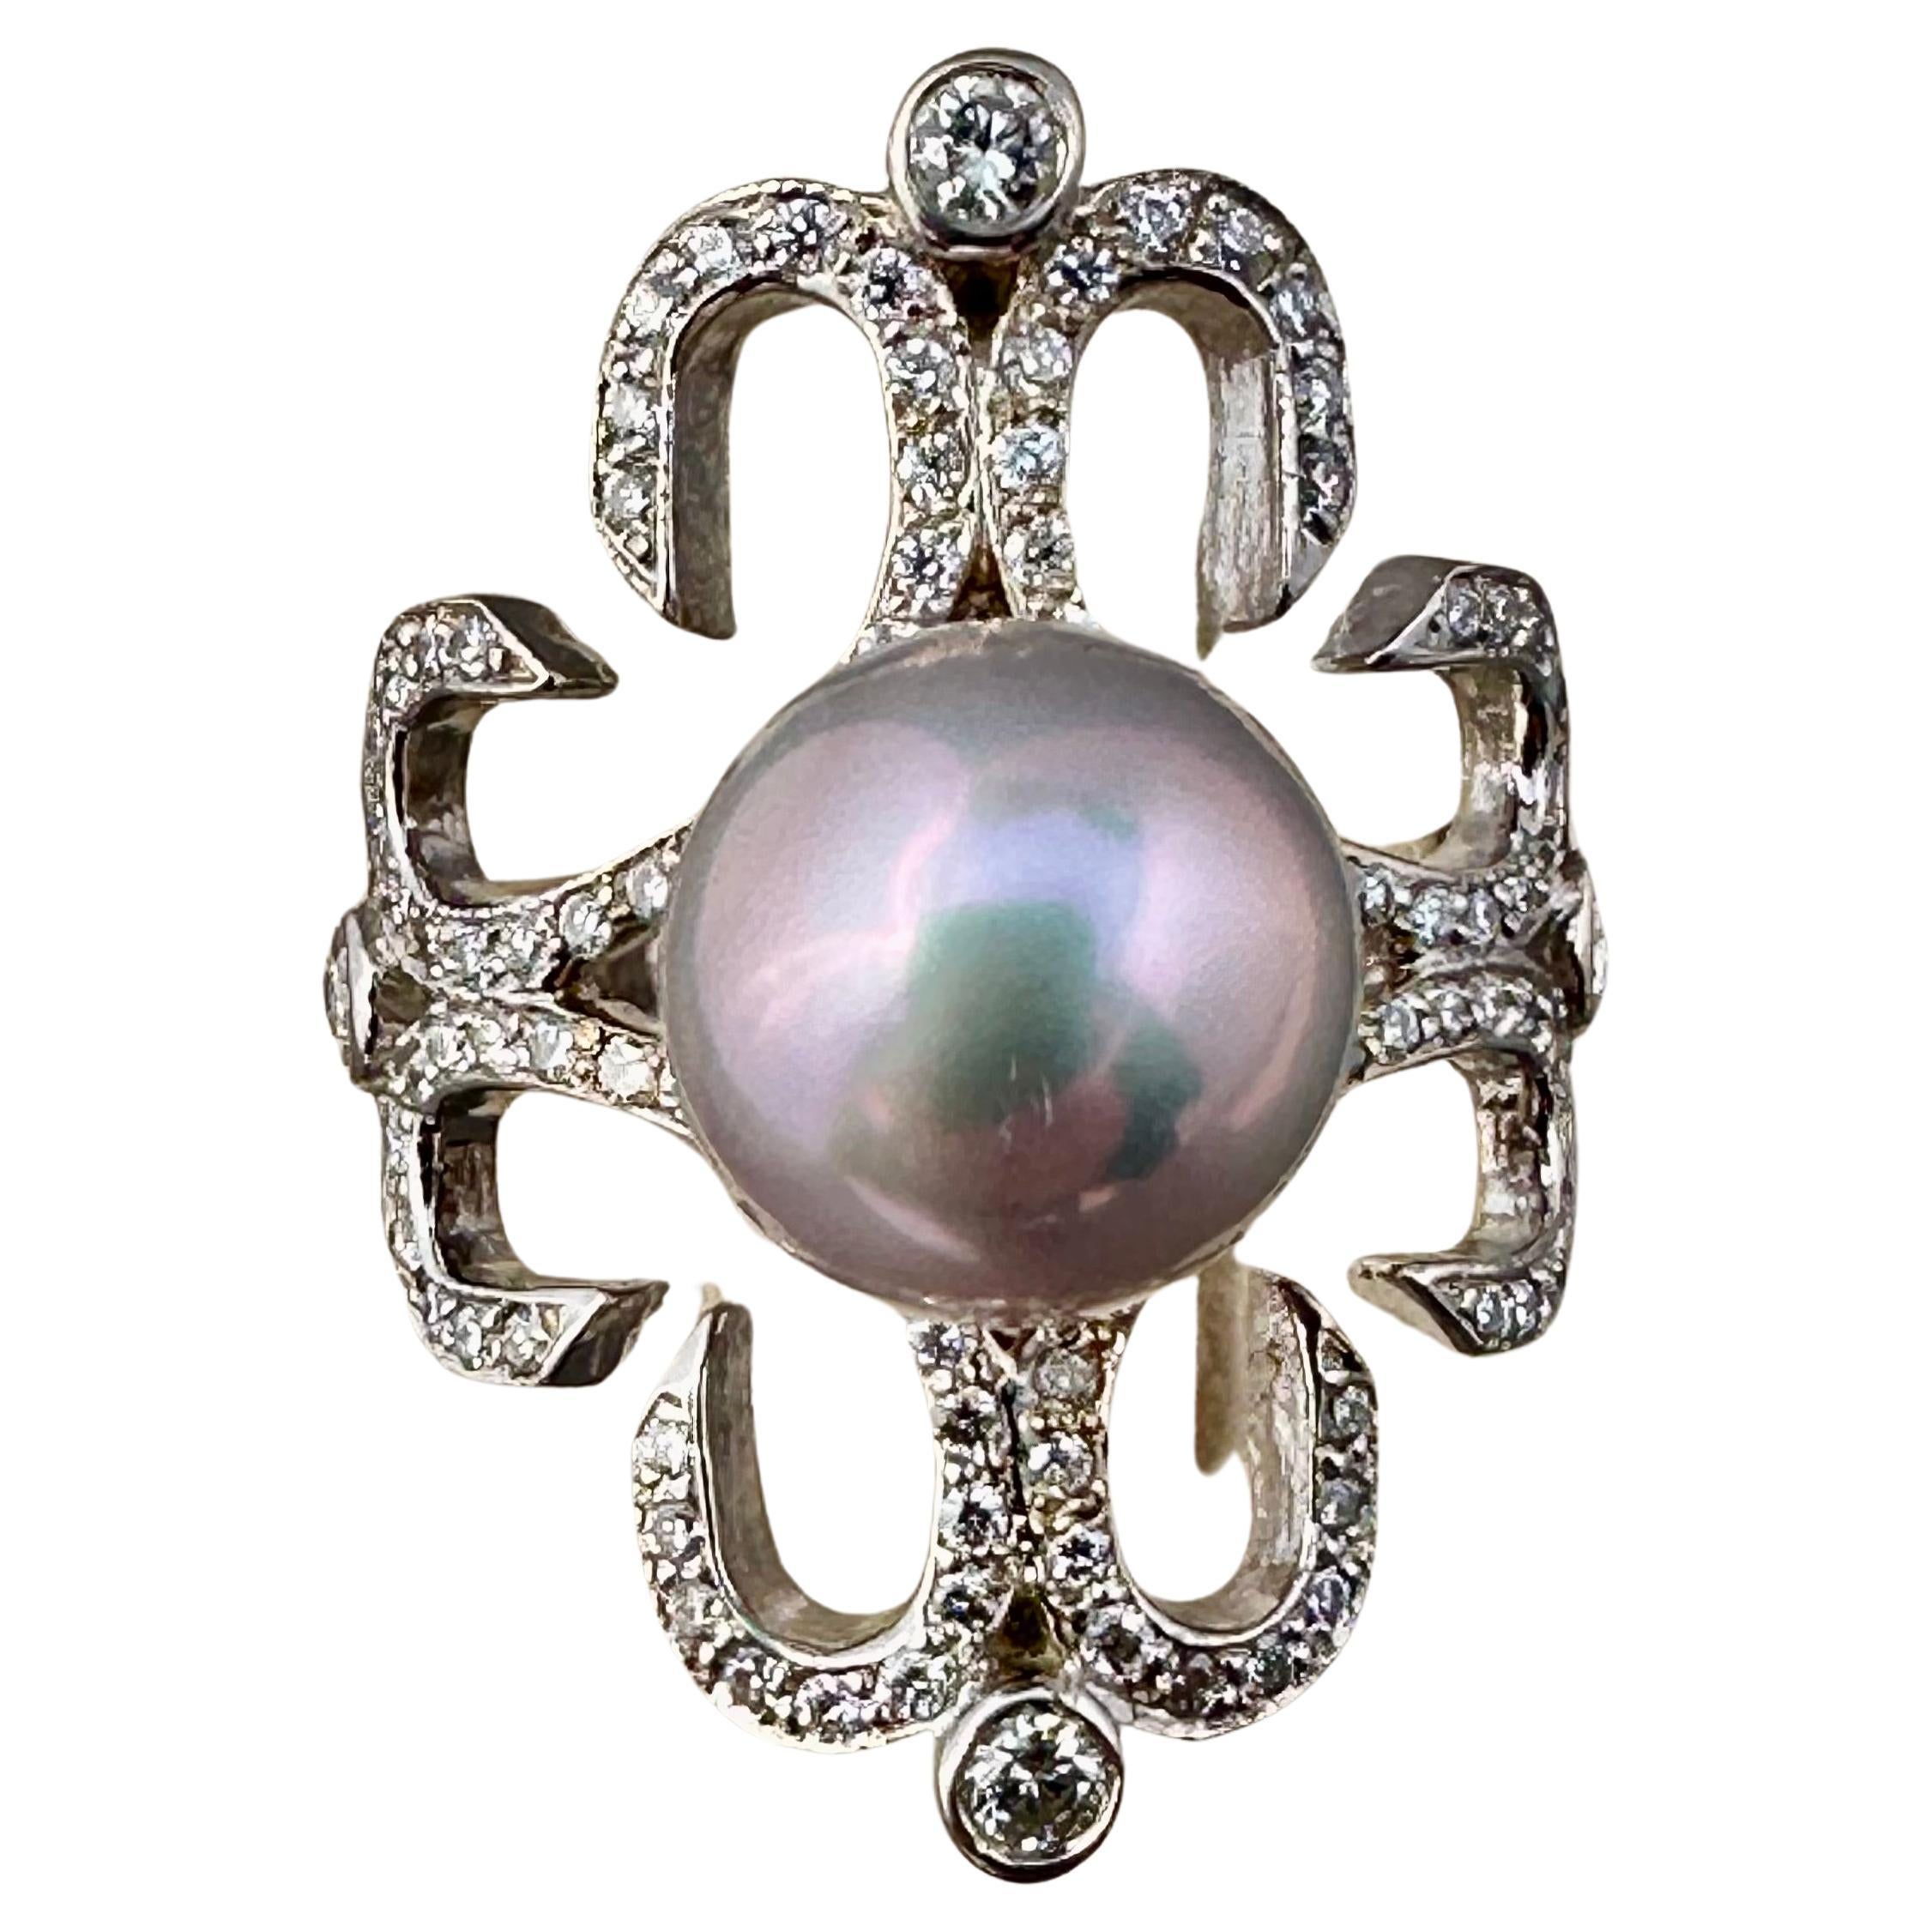 "Penny Preville" jewelry design Diamond 18K W.G.  Ring with South Sea Pearl 